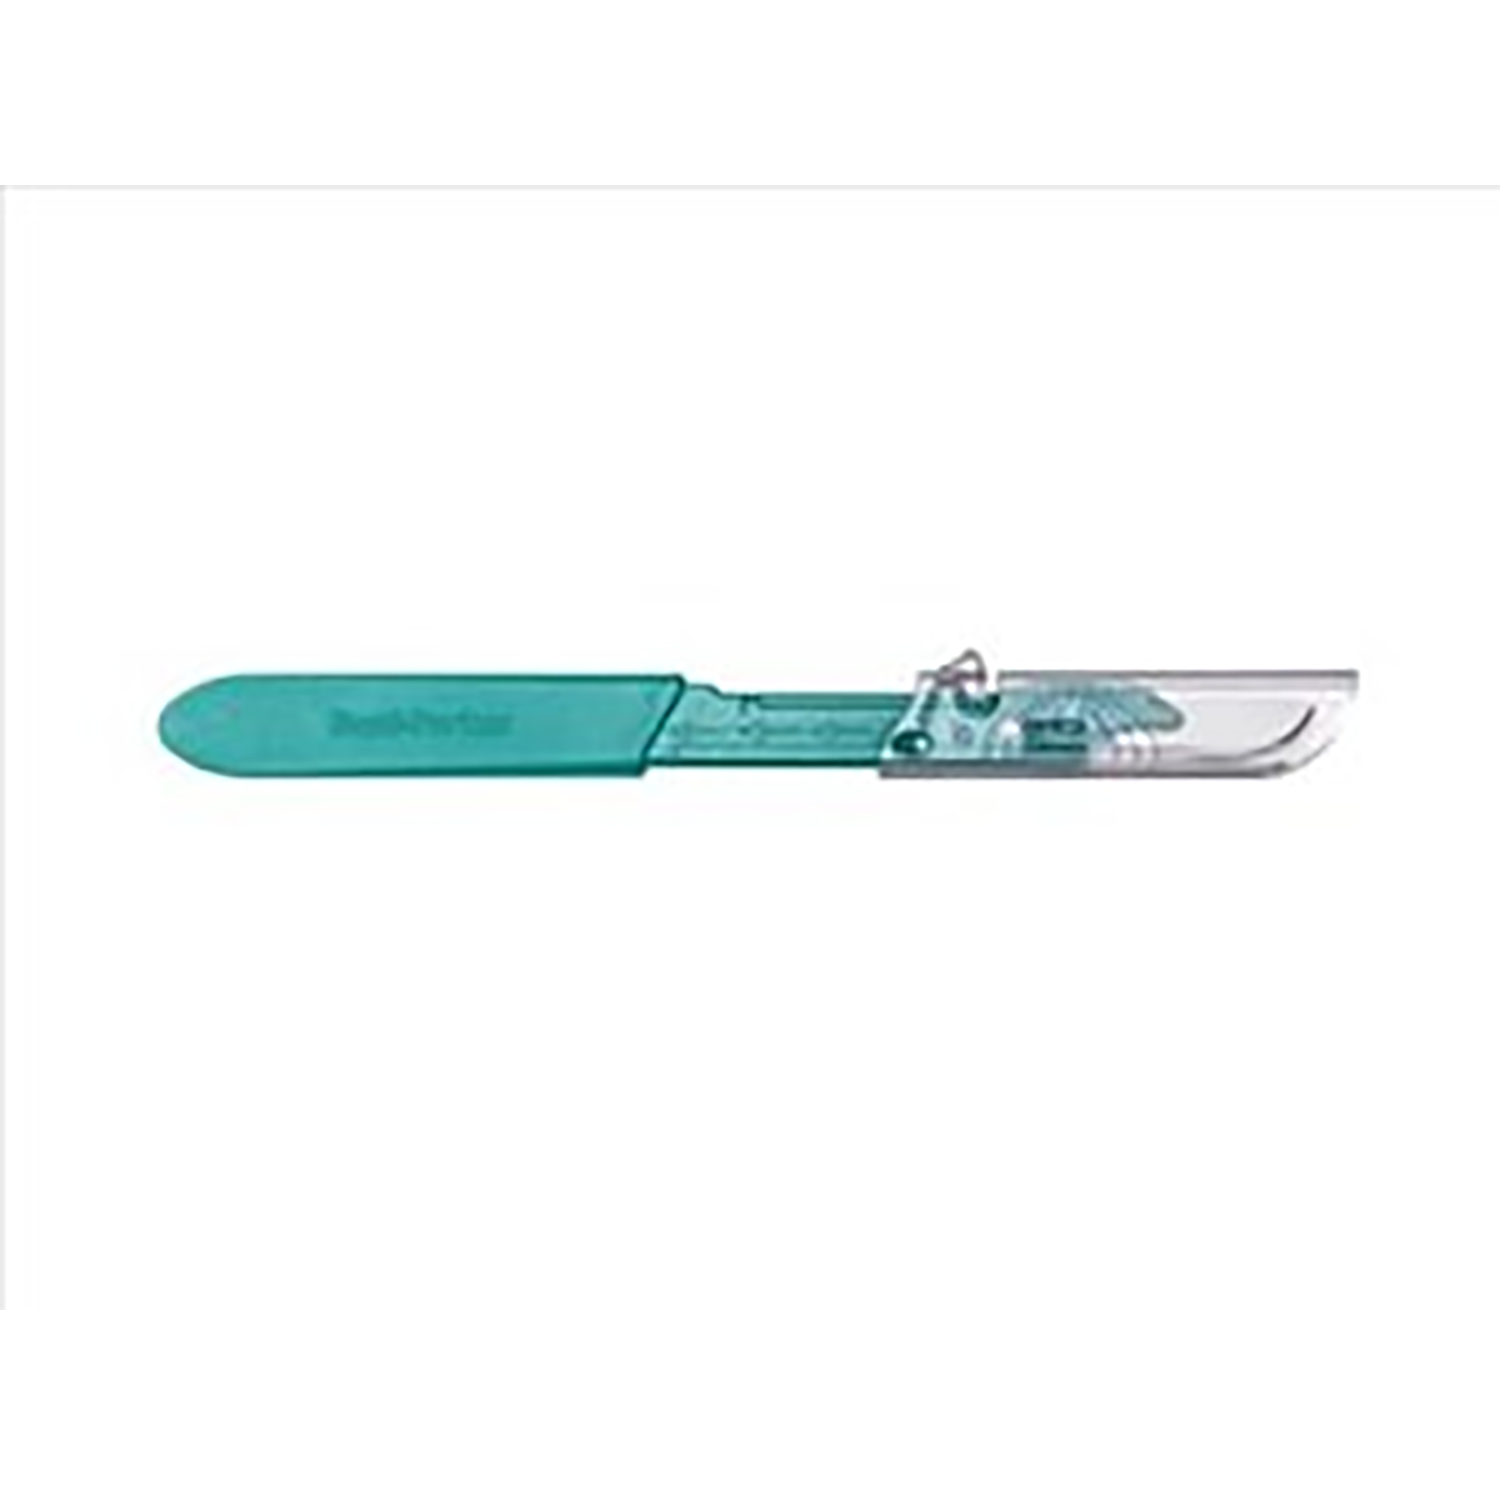 Scalpel Disposable Safety Blade | Size 20 | Pack of 100